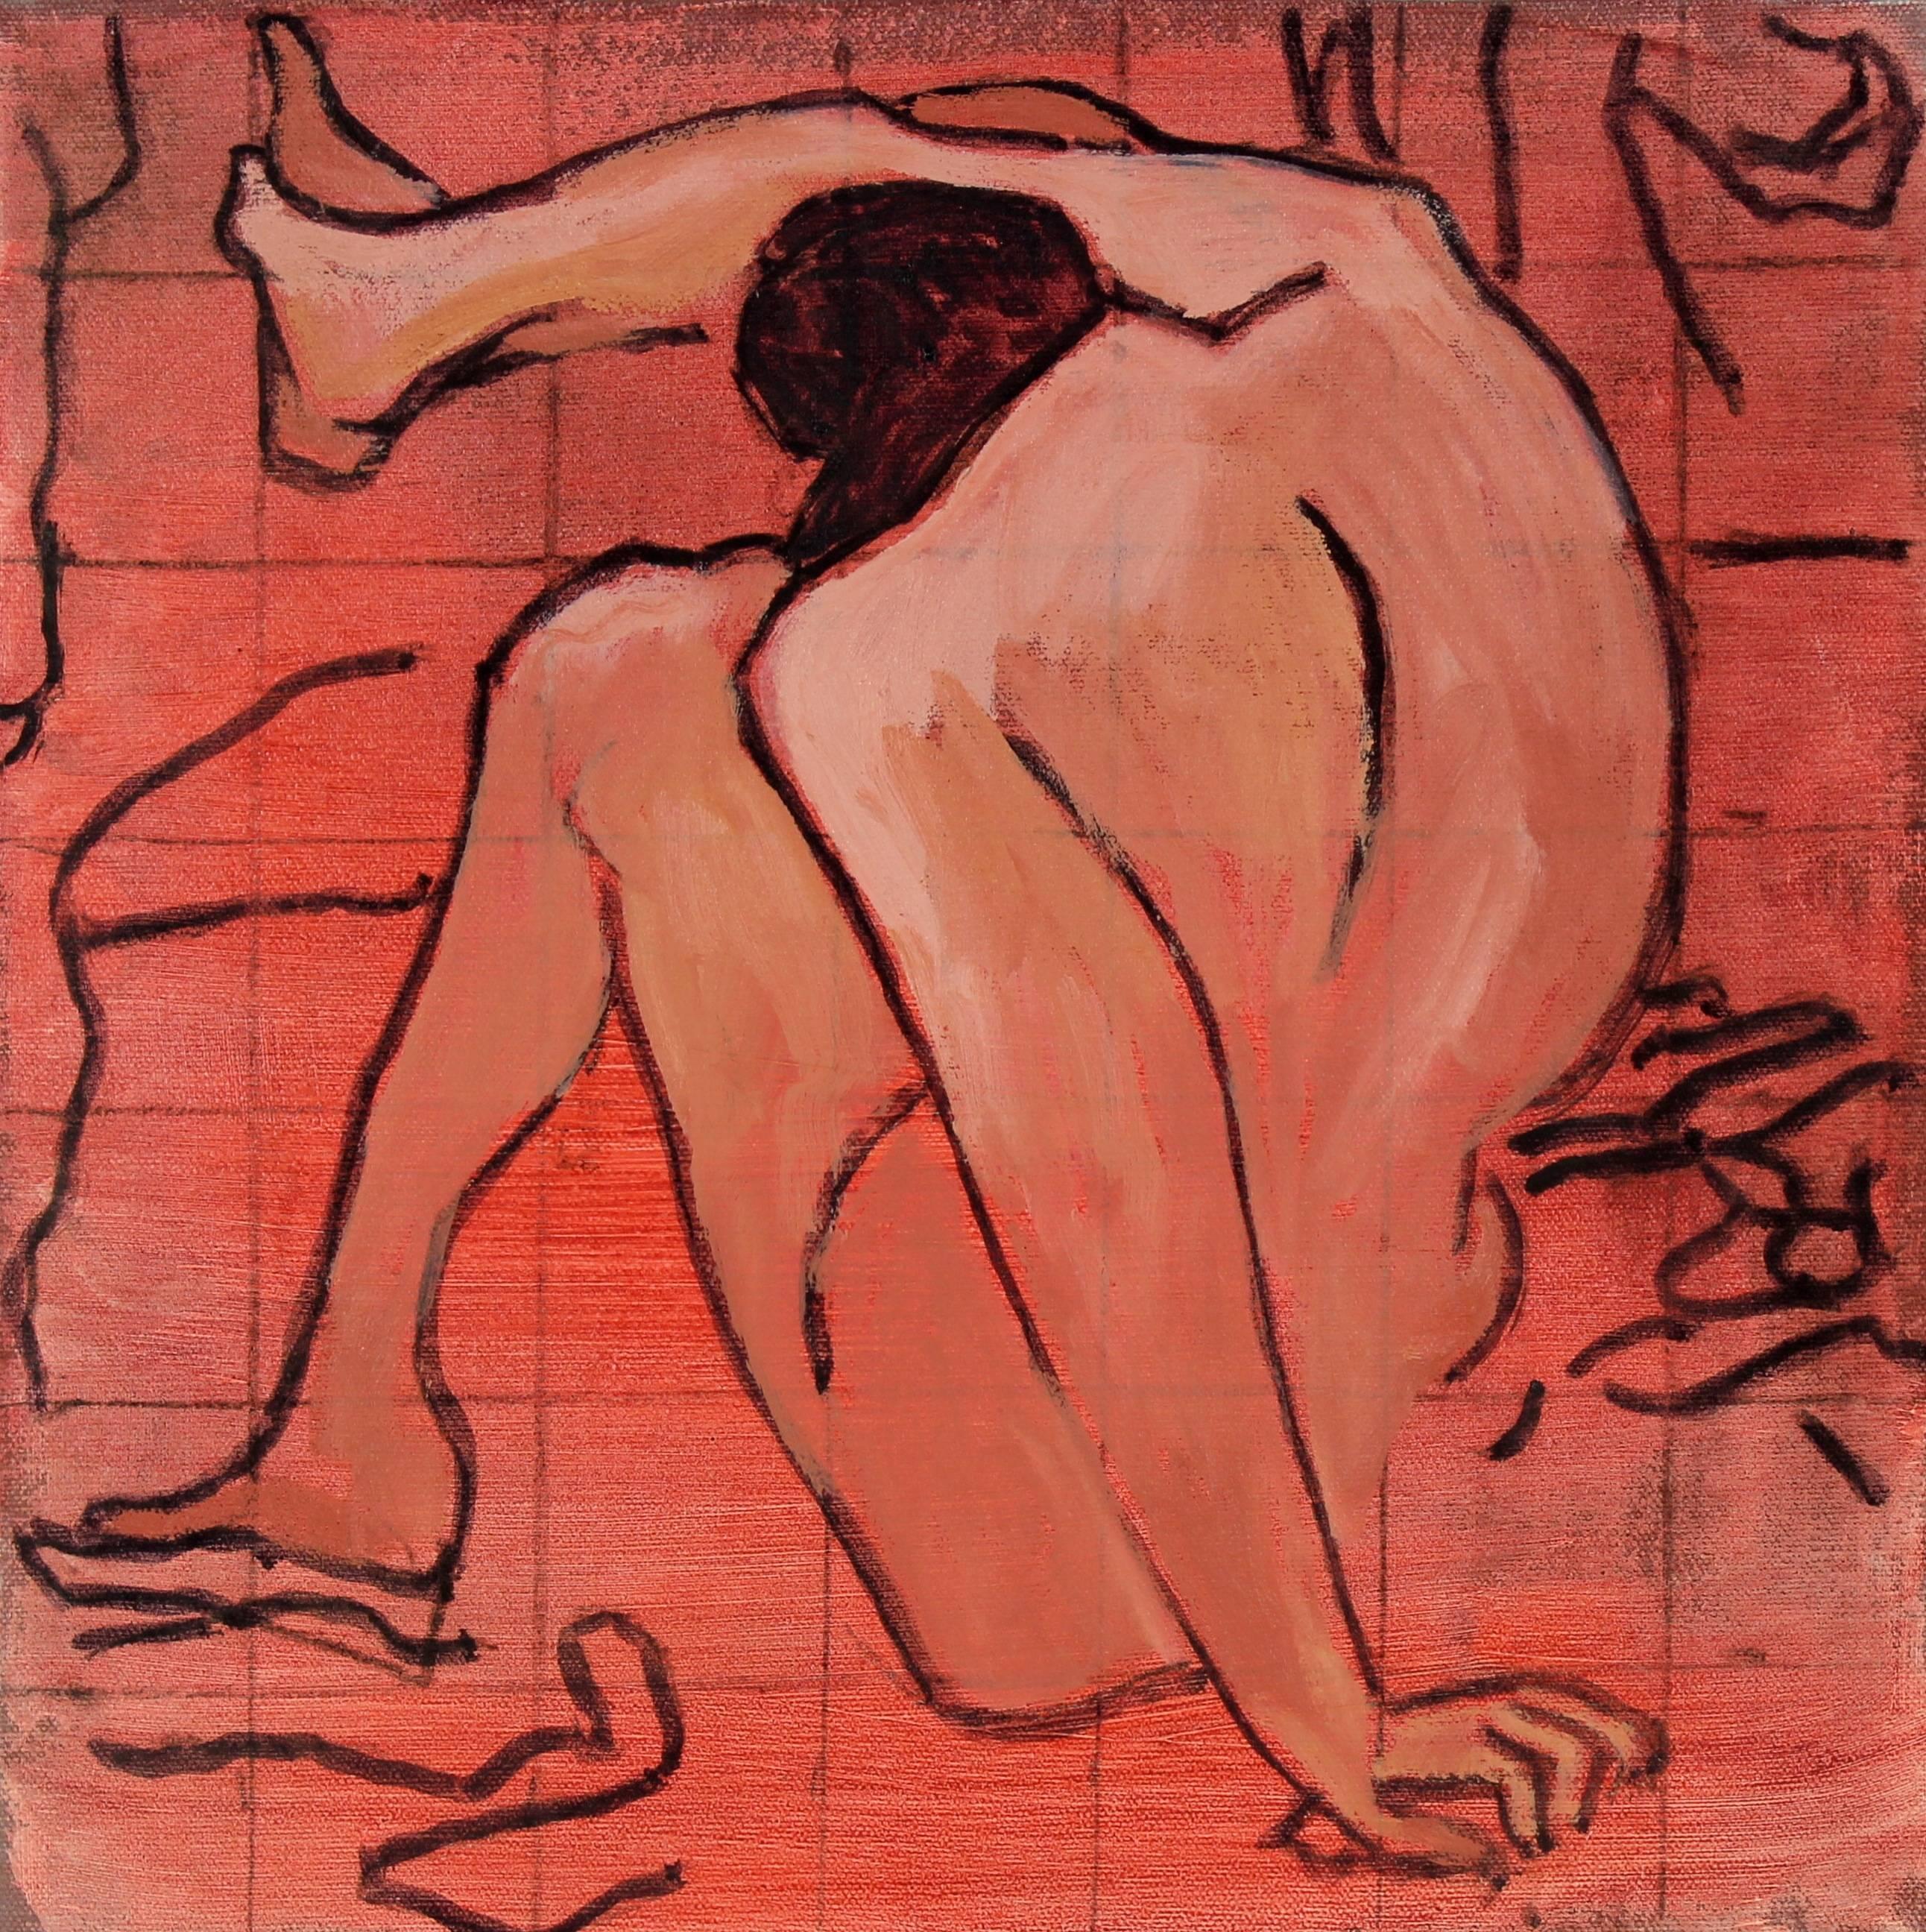 This late 20th century oil on canvas female figure with red and pink is by Oakland artist Rip Matteson (1920-2011). Matteson studied at U.C. Berkeley, California College of the Arts in San Francisco, Scuola di Belle Arte in Rome, the Parsons School